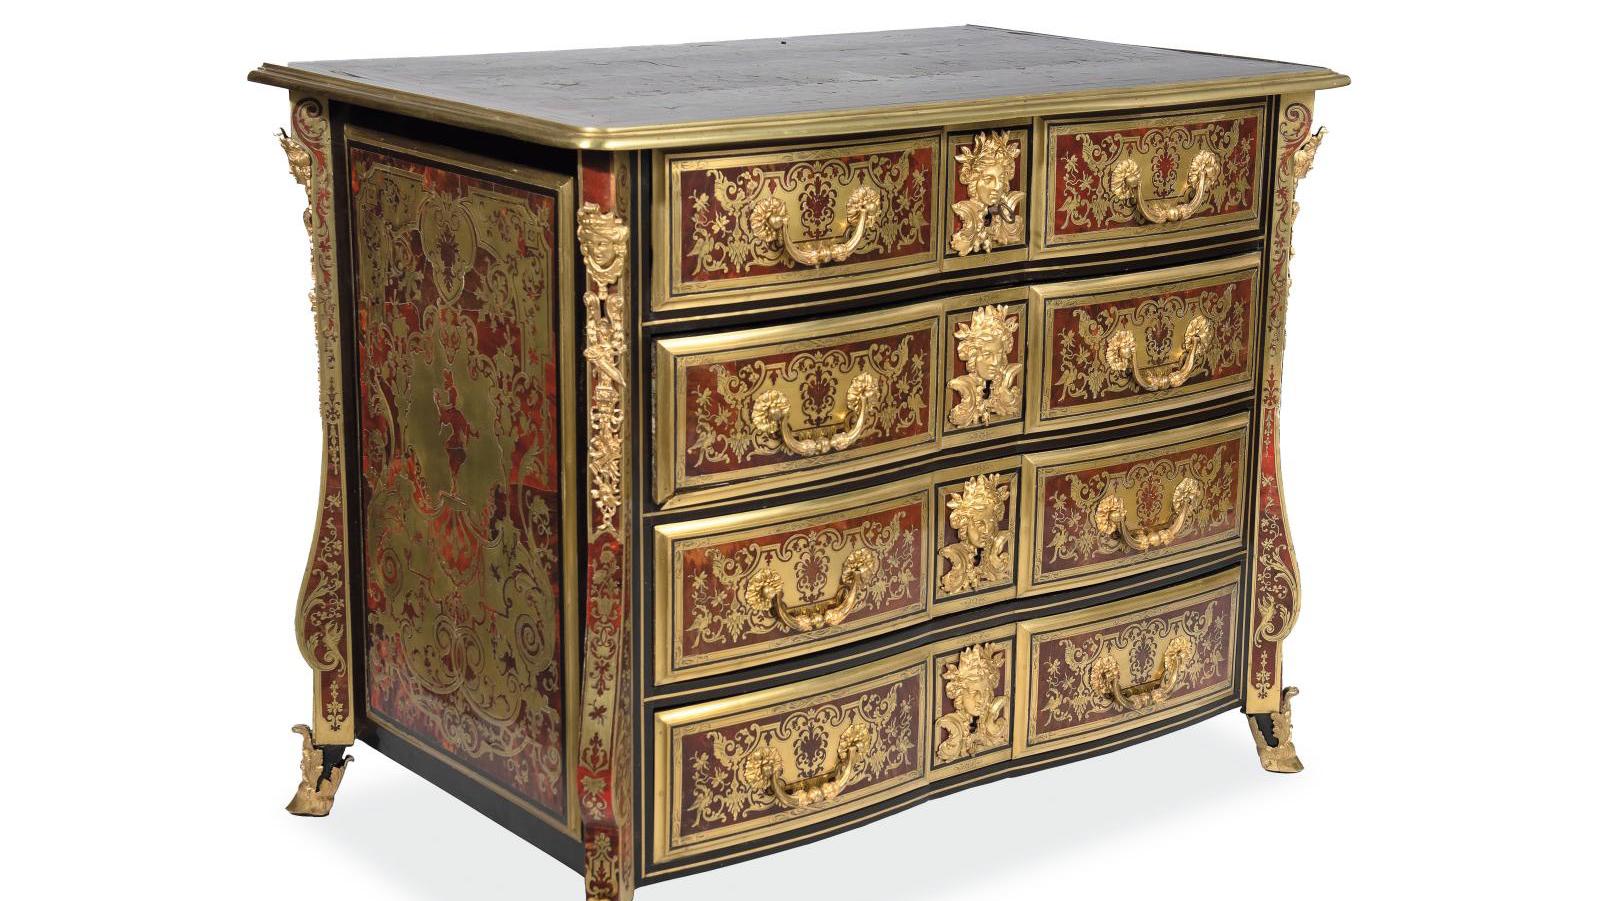 Attributed to Nicolas Sageot (1666-1731), chest of drawers with a slightly crossbow-shaped... Nicolas Sageot: The Use of Tortoiseshell in the Age of Louis XIV